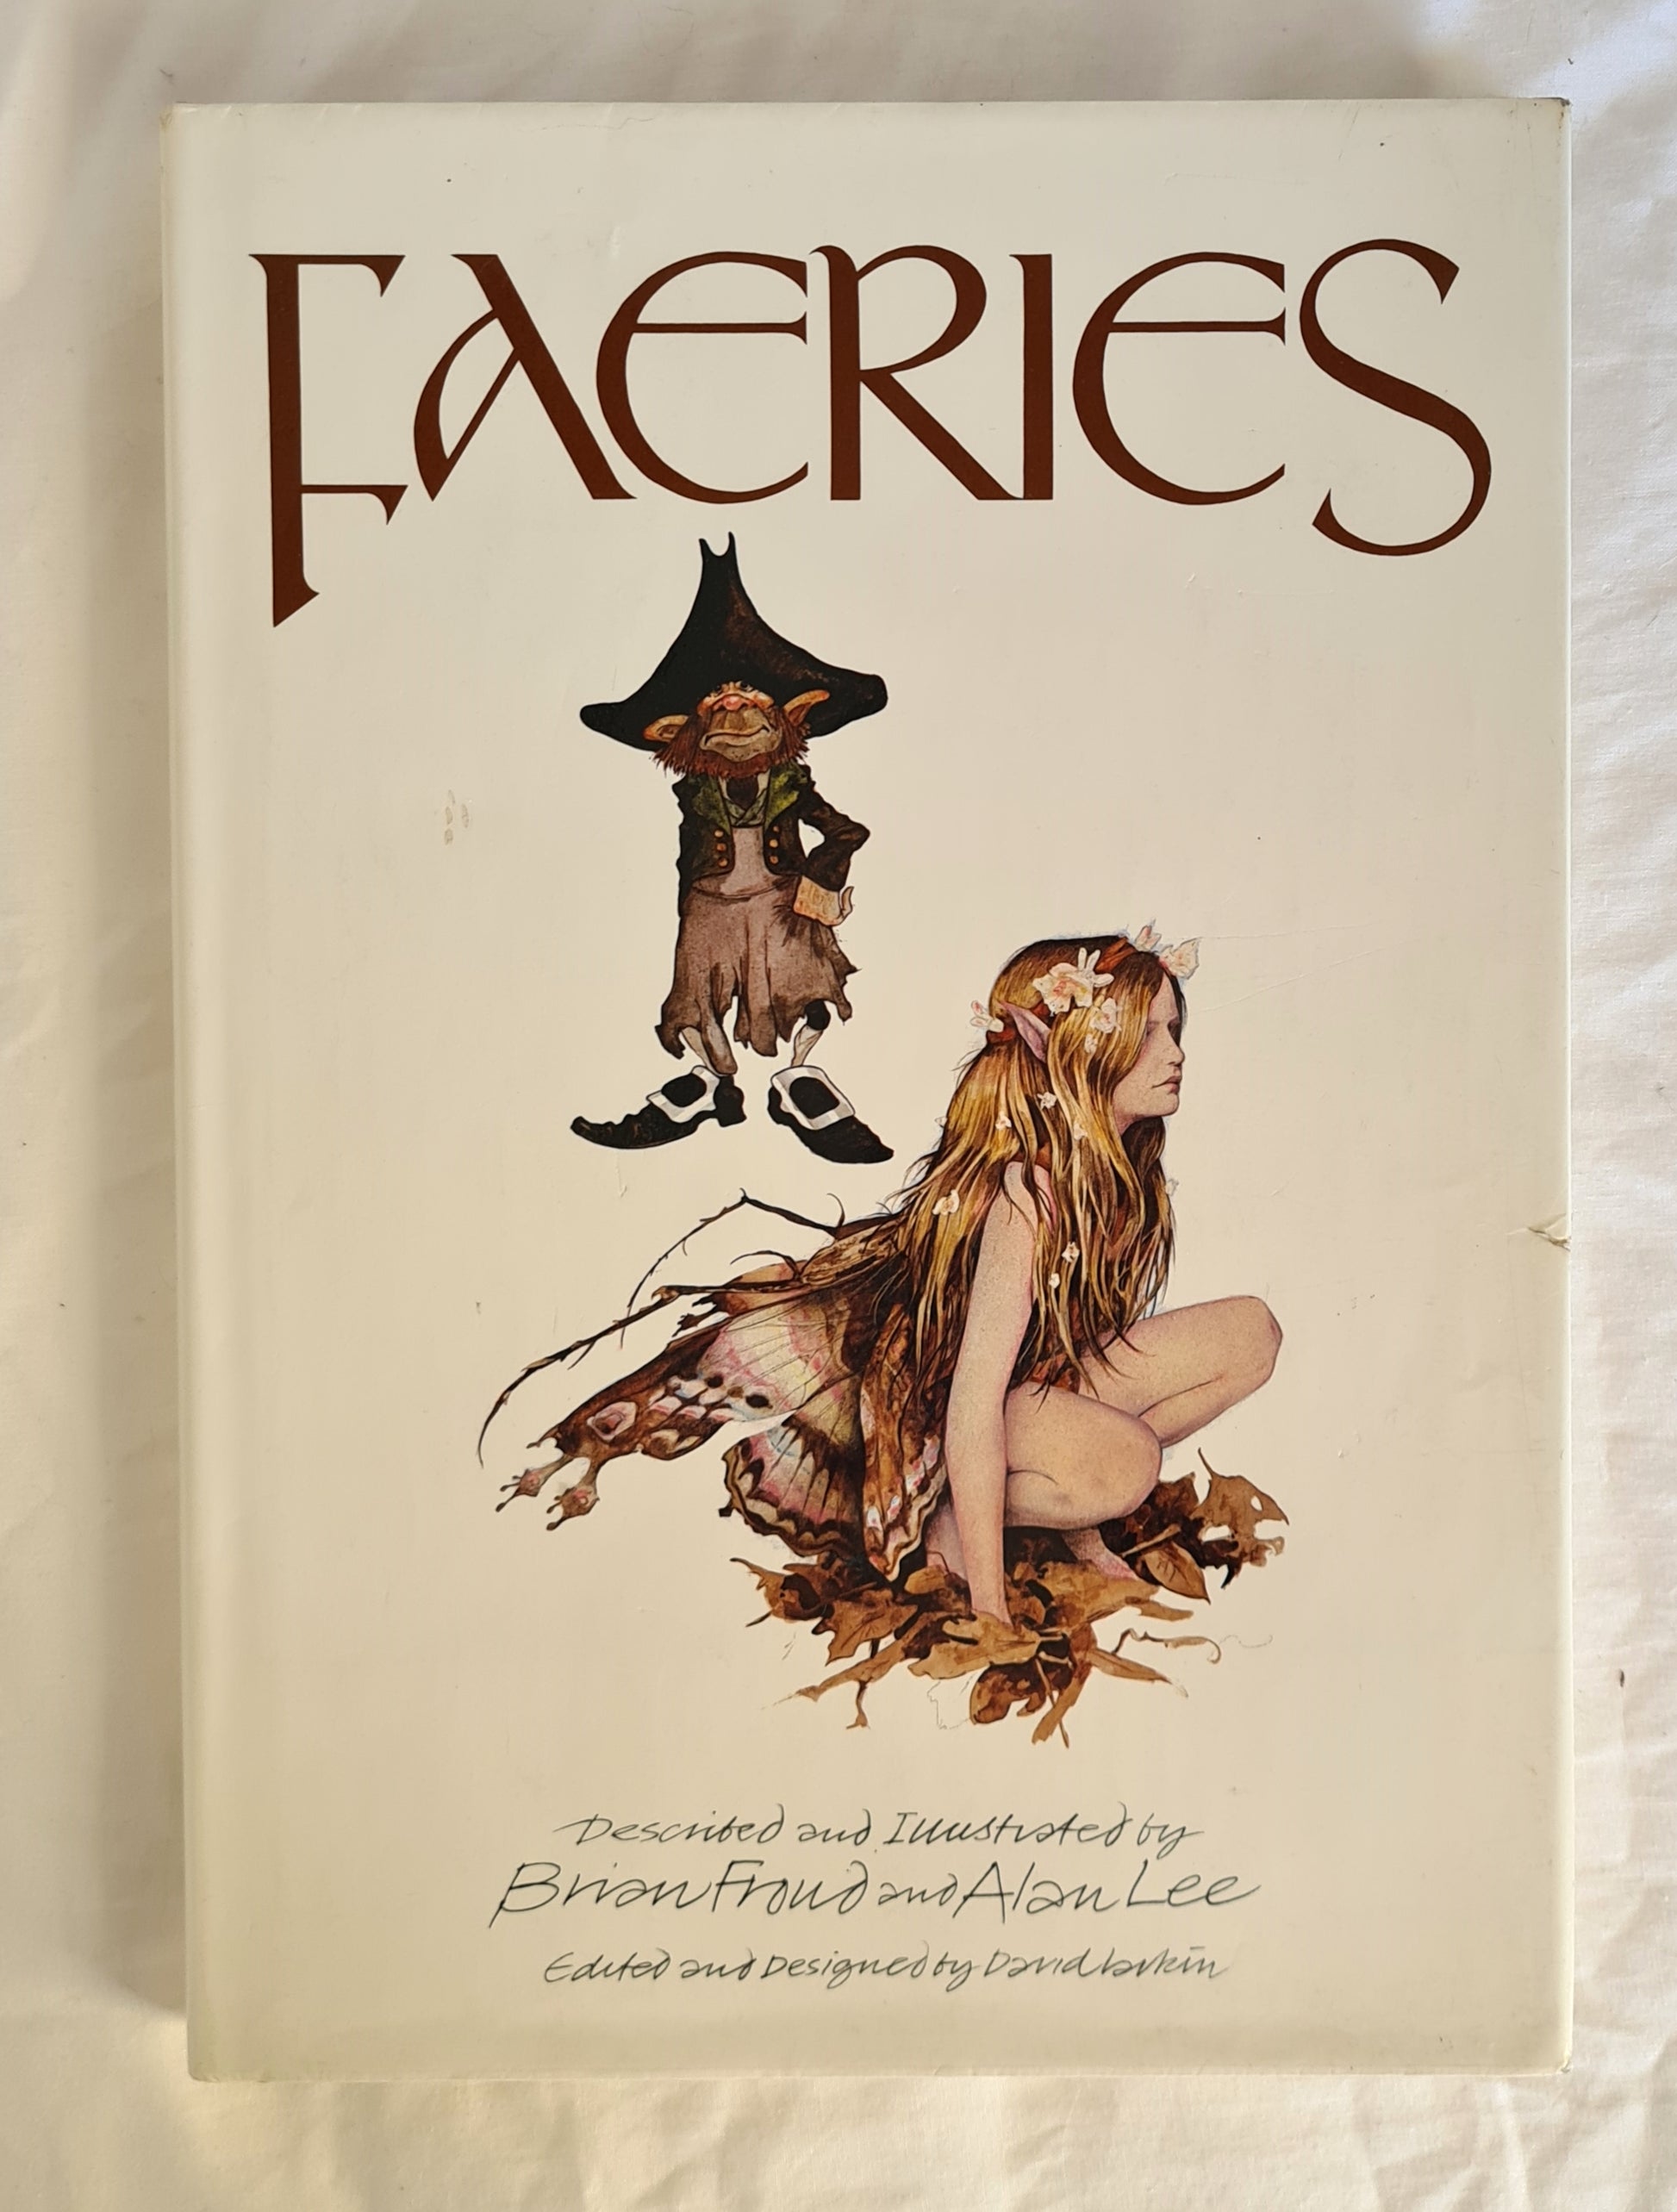 Faeries  Described and illustrated by Brian Froud and Alan Lee  Edited and Designed by David Larkin